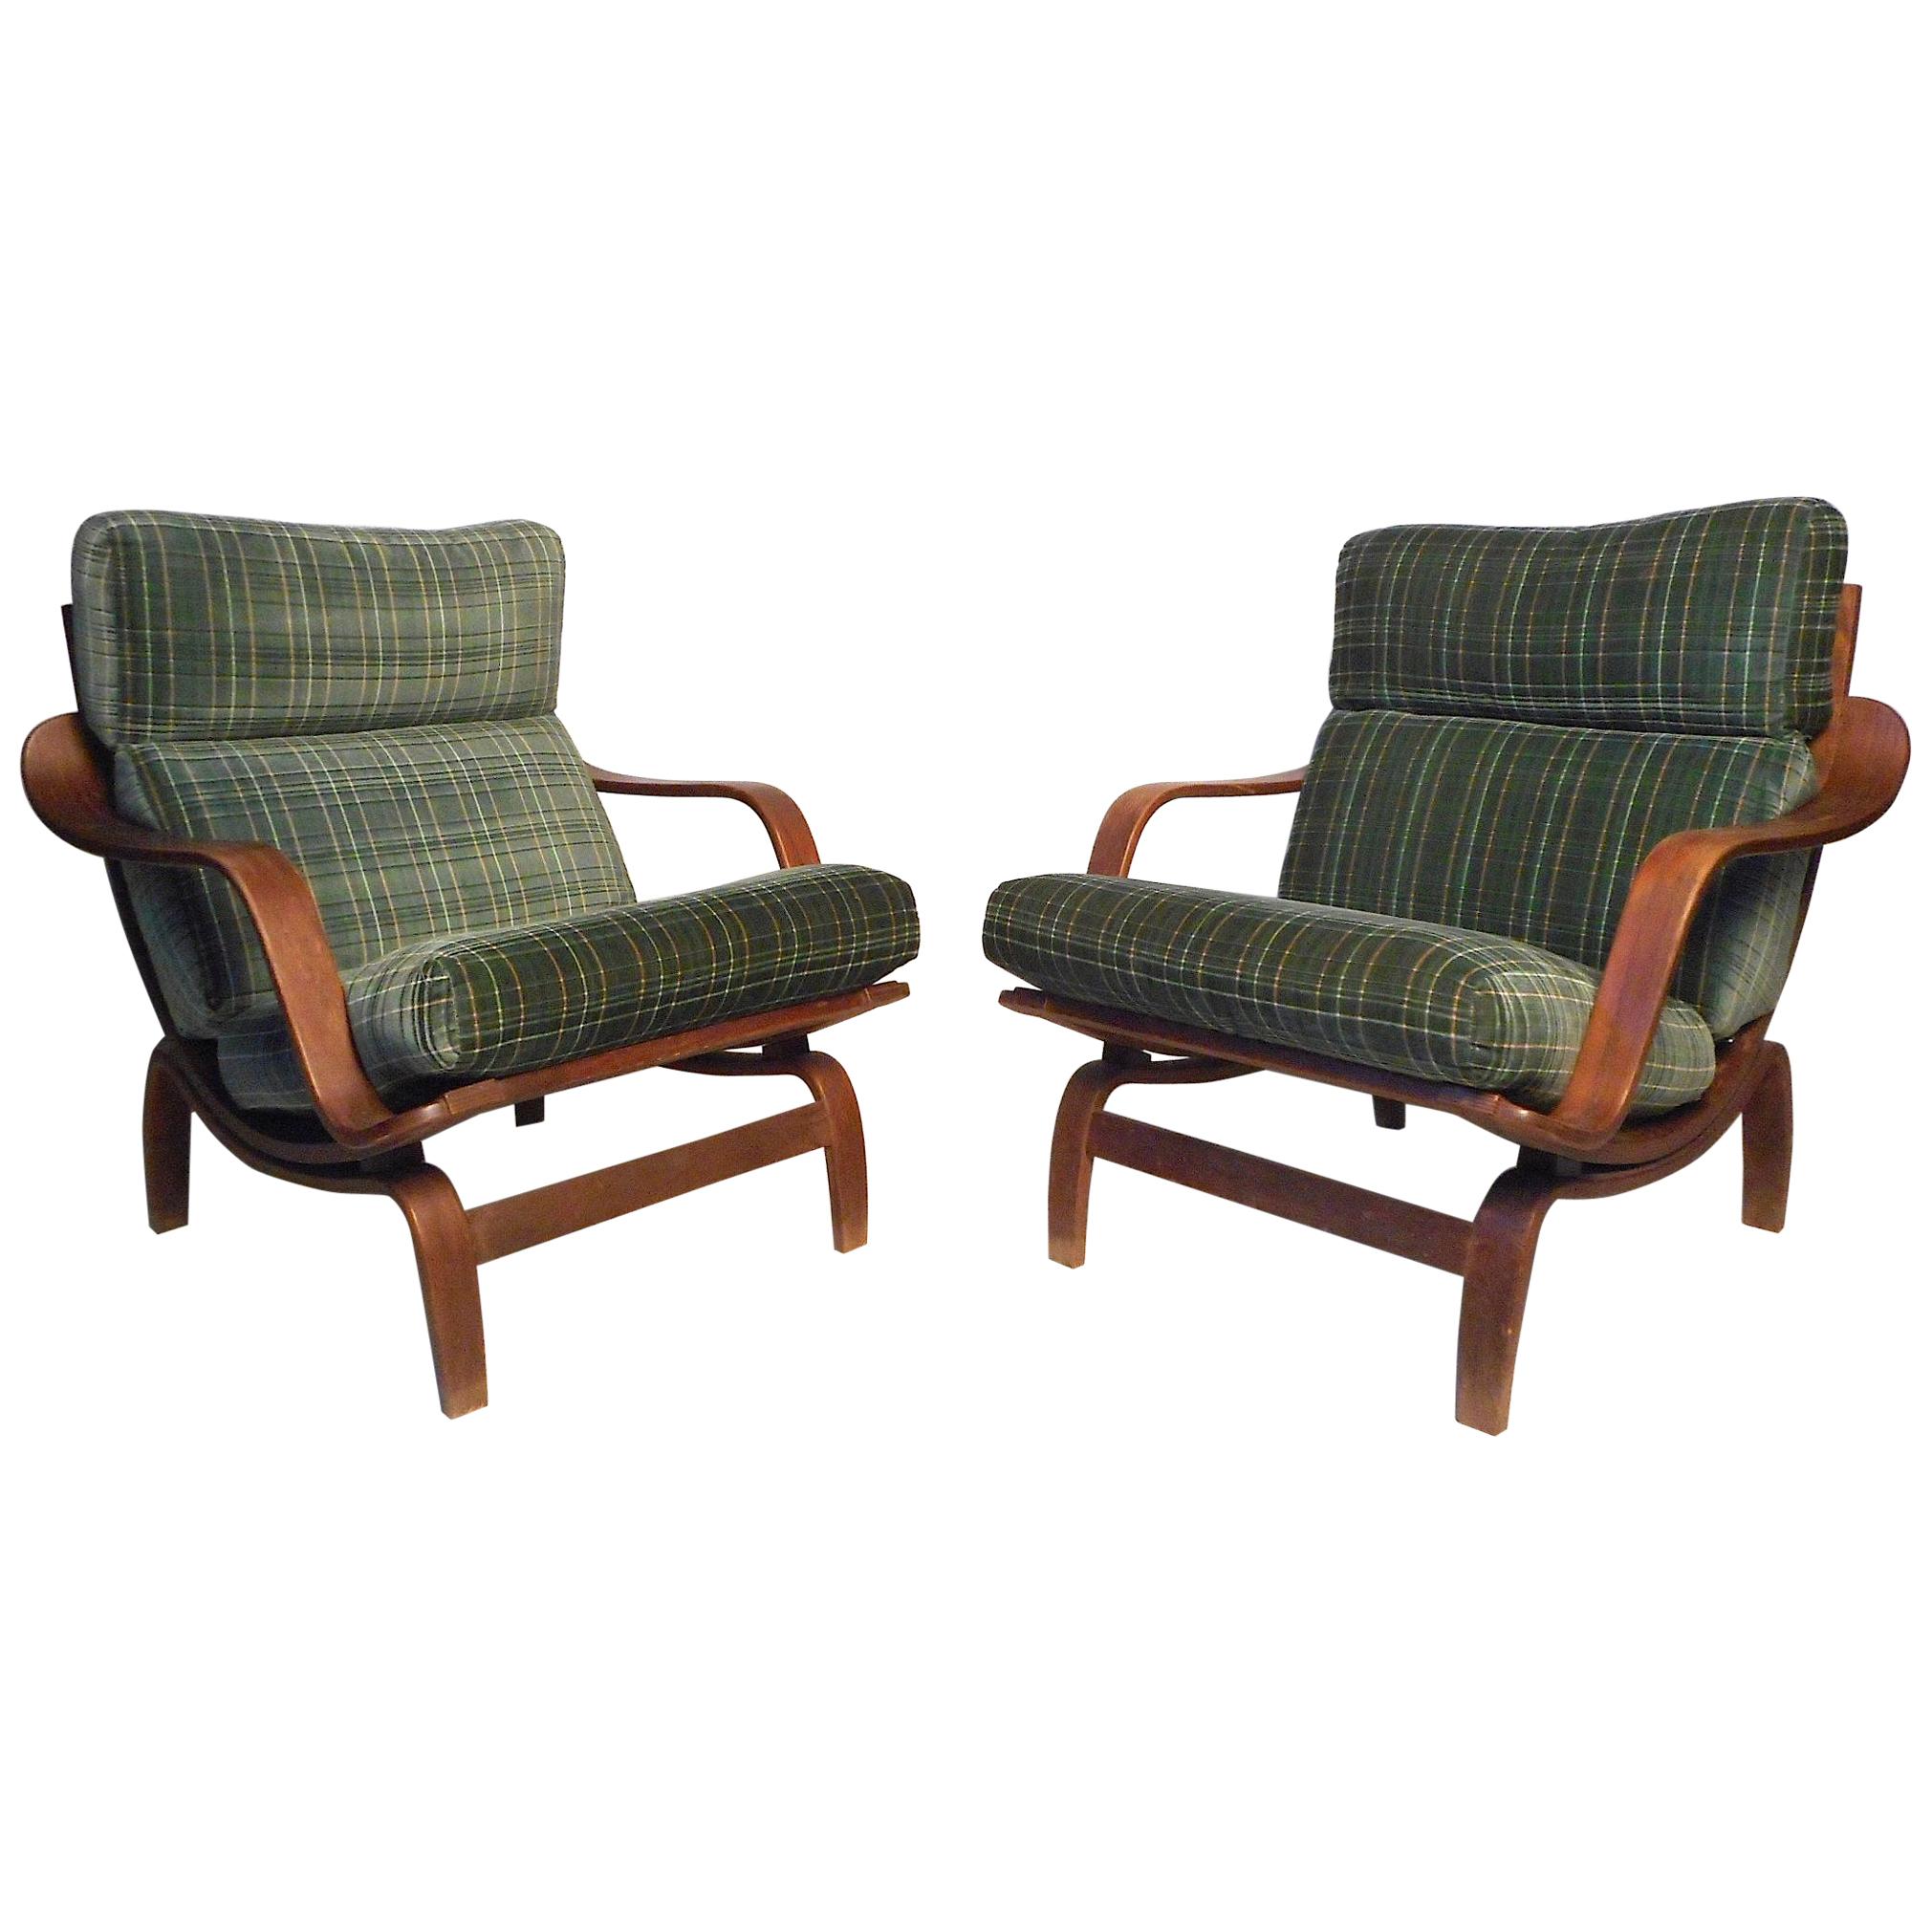 Pair of "Orbit" Lounge Chairs by Charlton